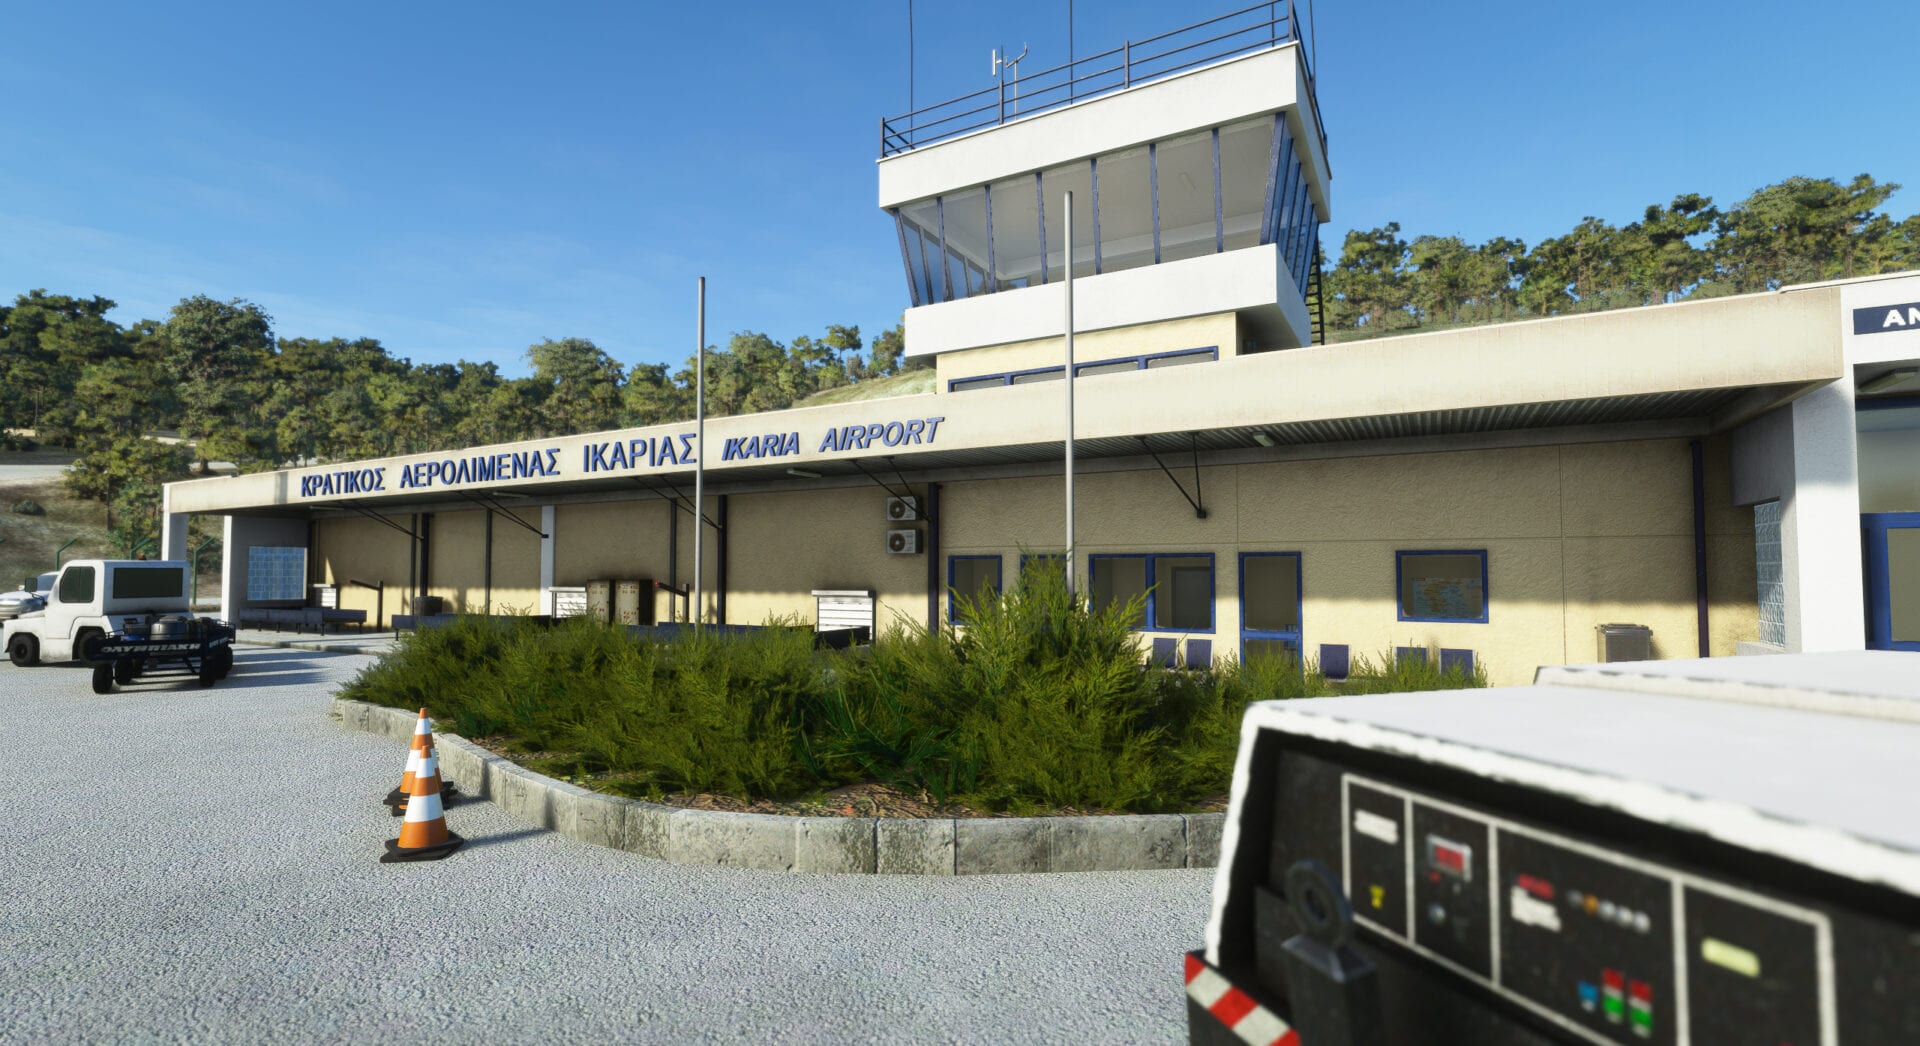 Microsoft Flight Simulator Ikaria & Bouarfa Airports Released; Aix Les Milles Airport Free for Today [UPDATED]